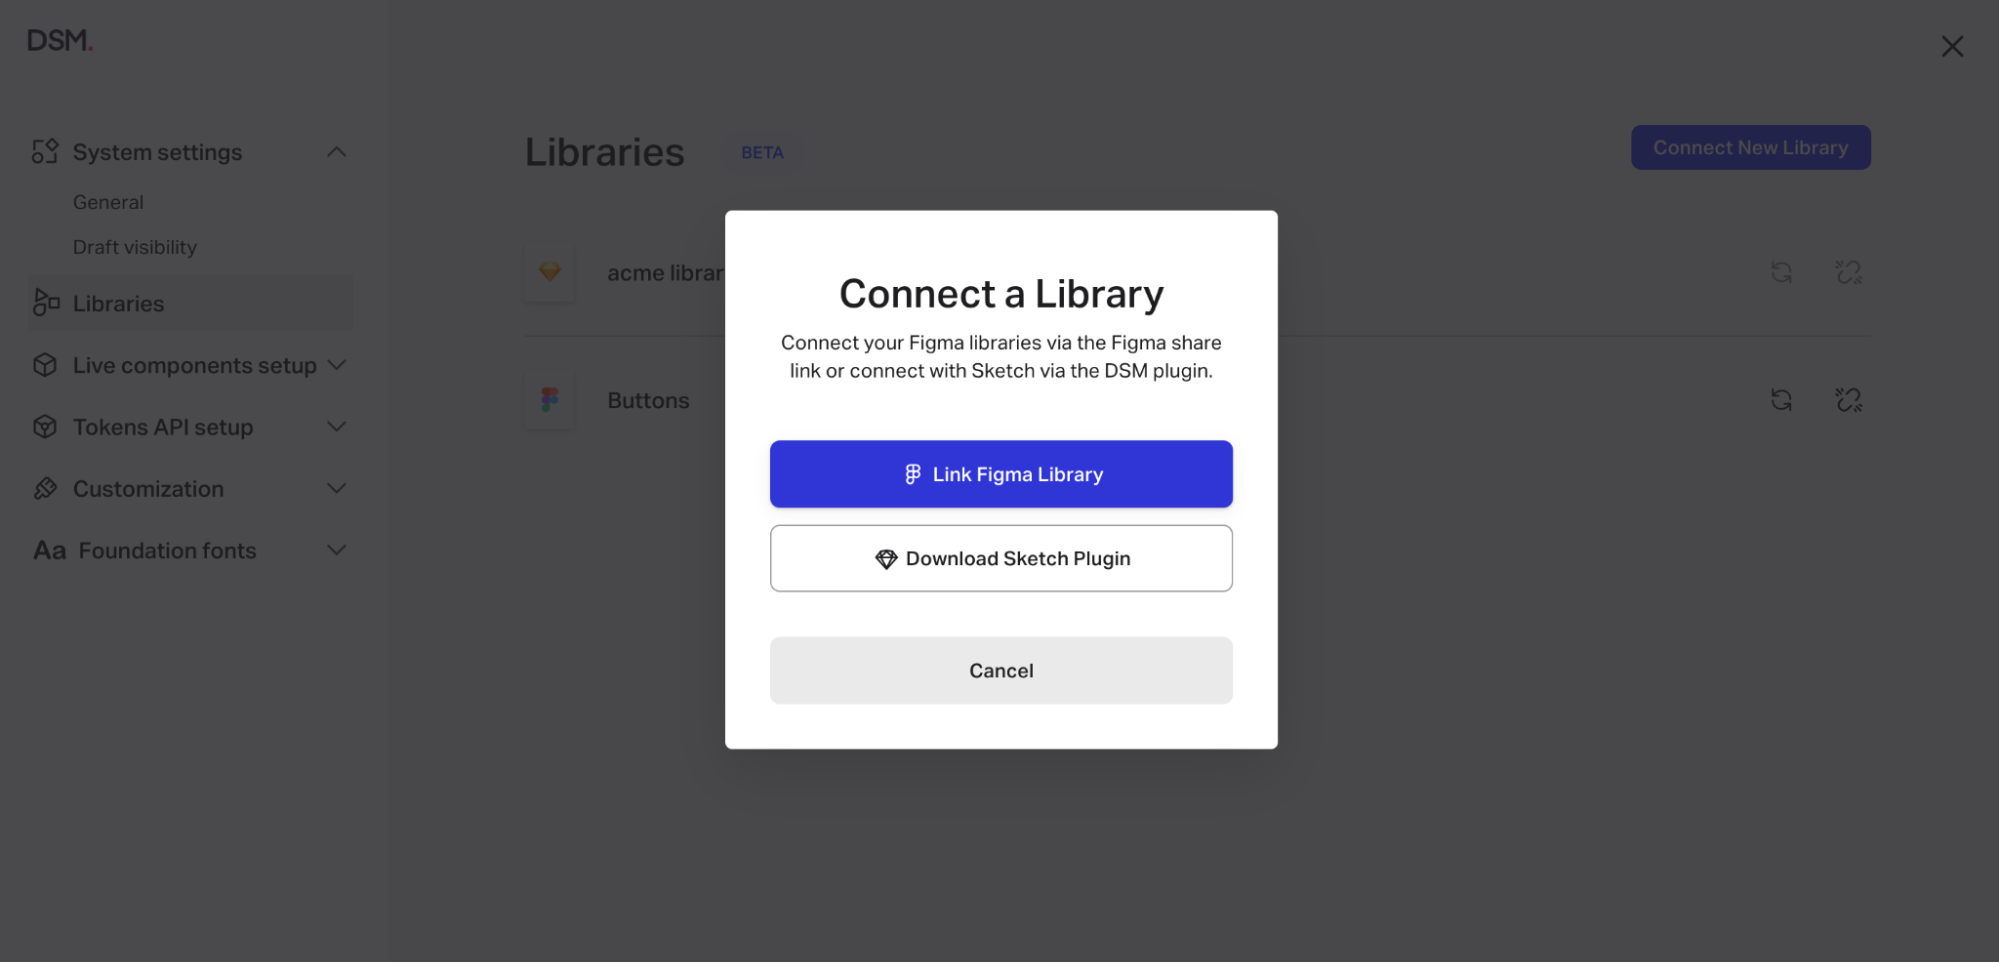 invision-dsm-connect-library-link-figma.png